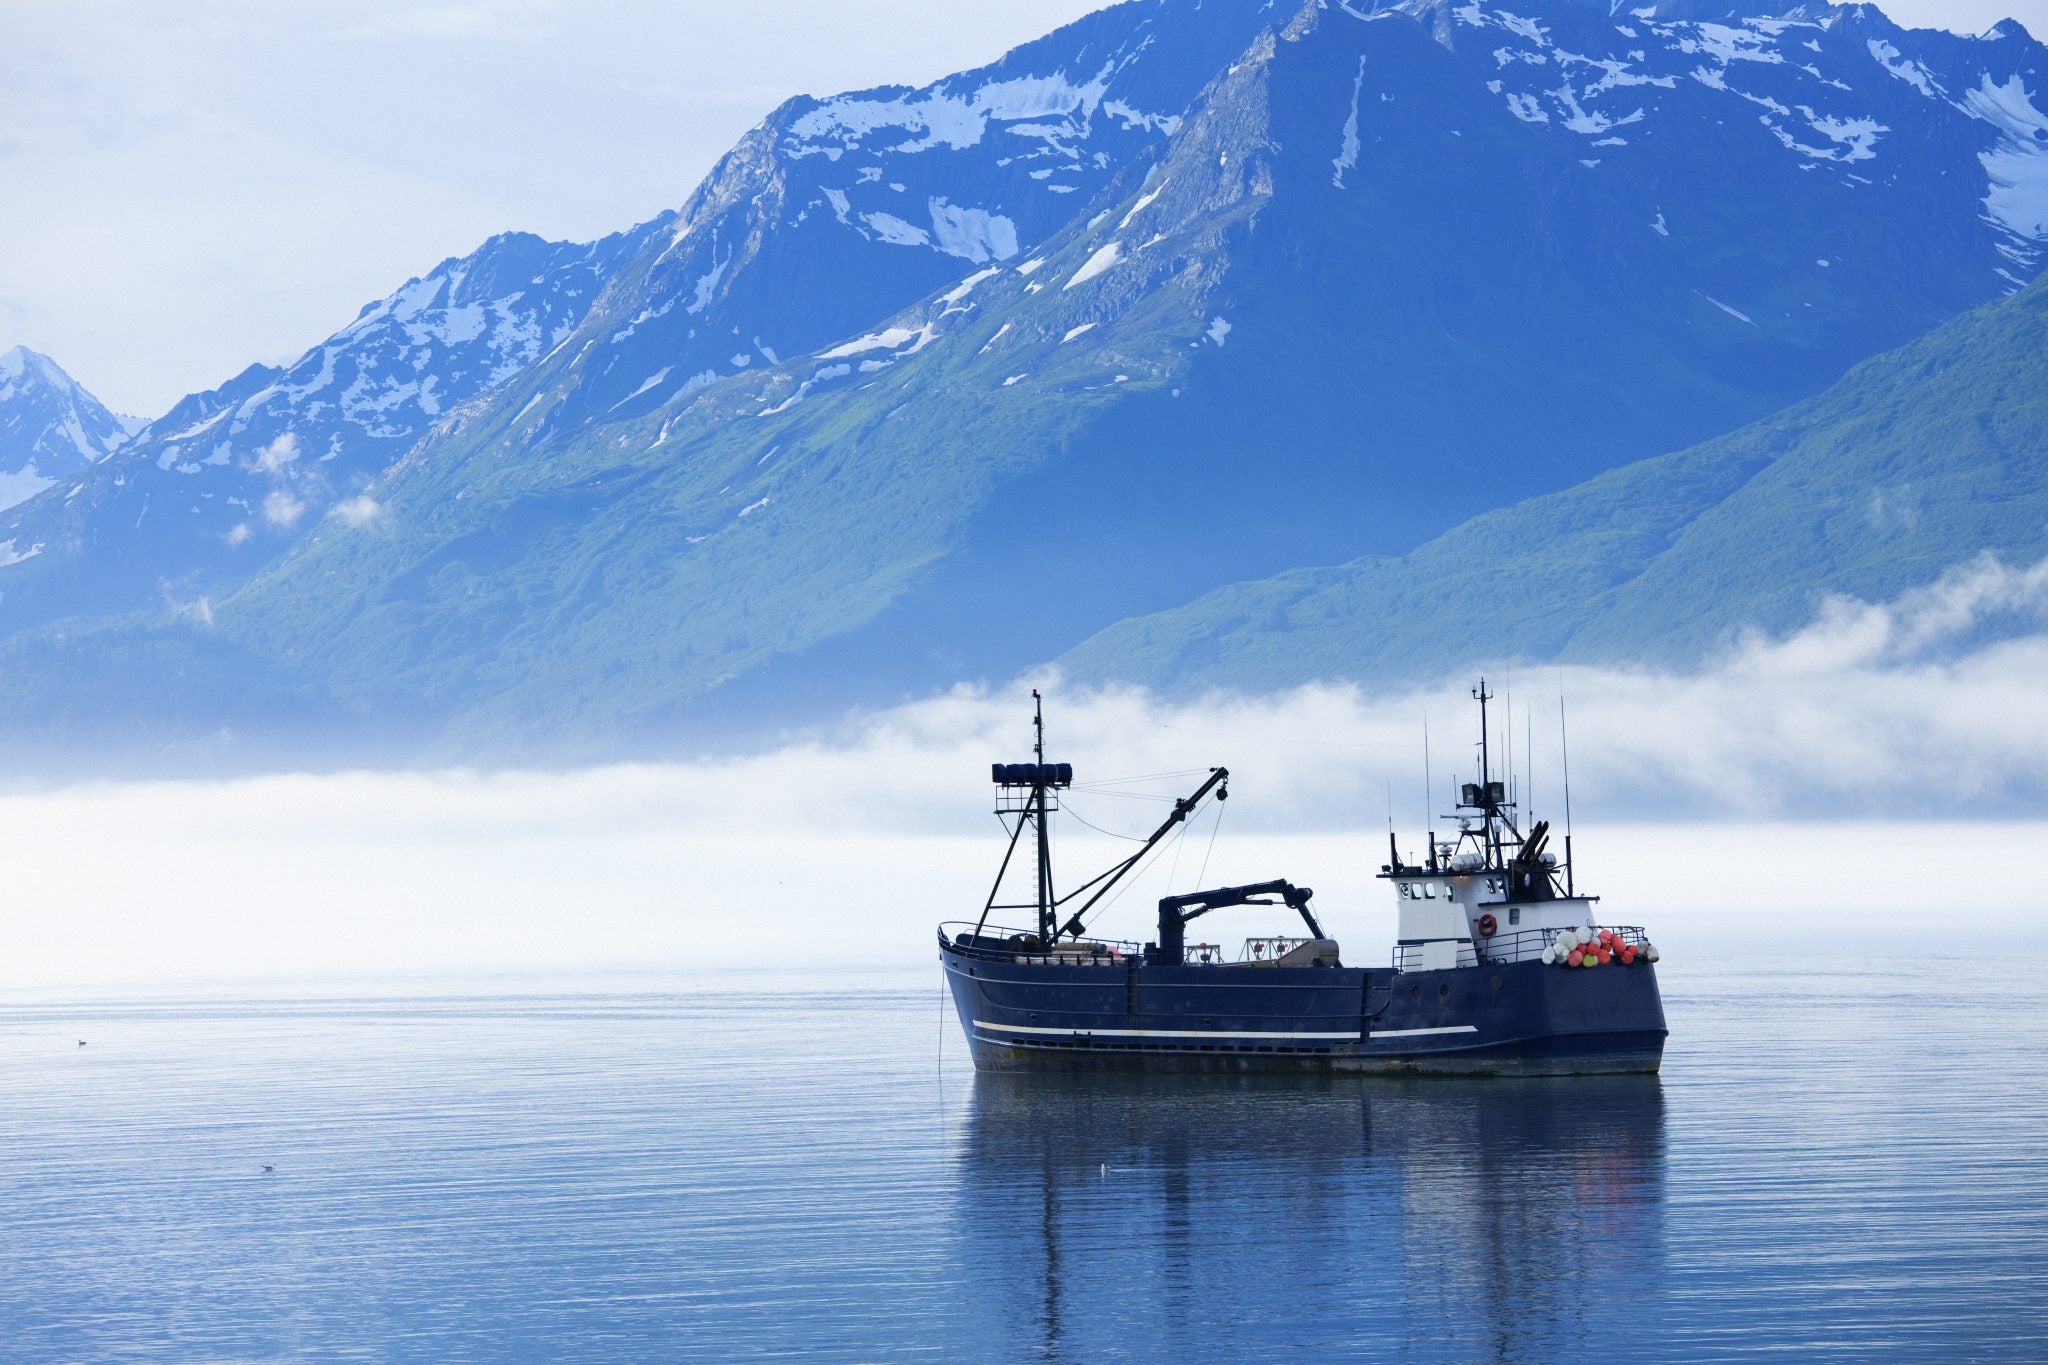 fishing boat on the water with mountains in the background.